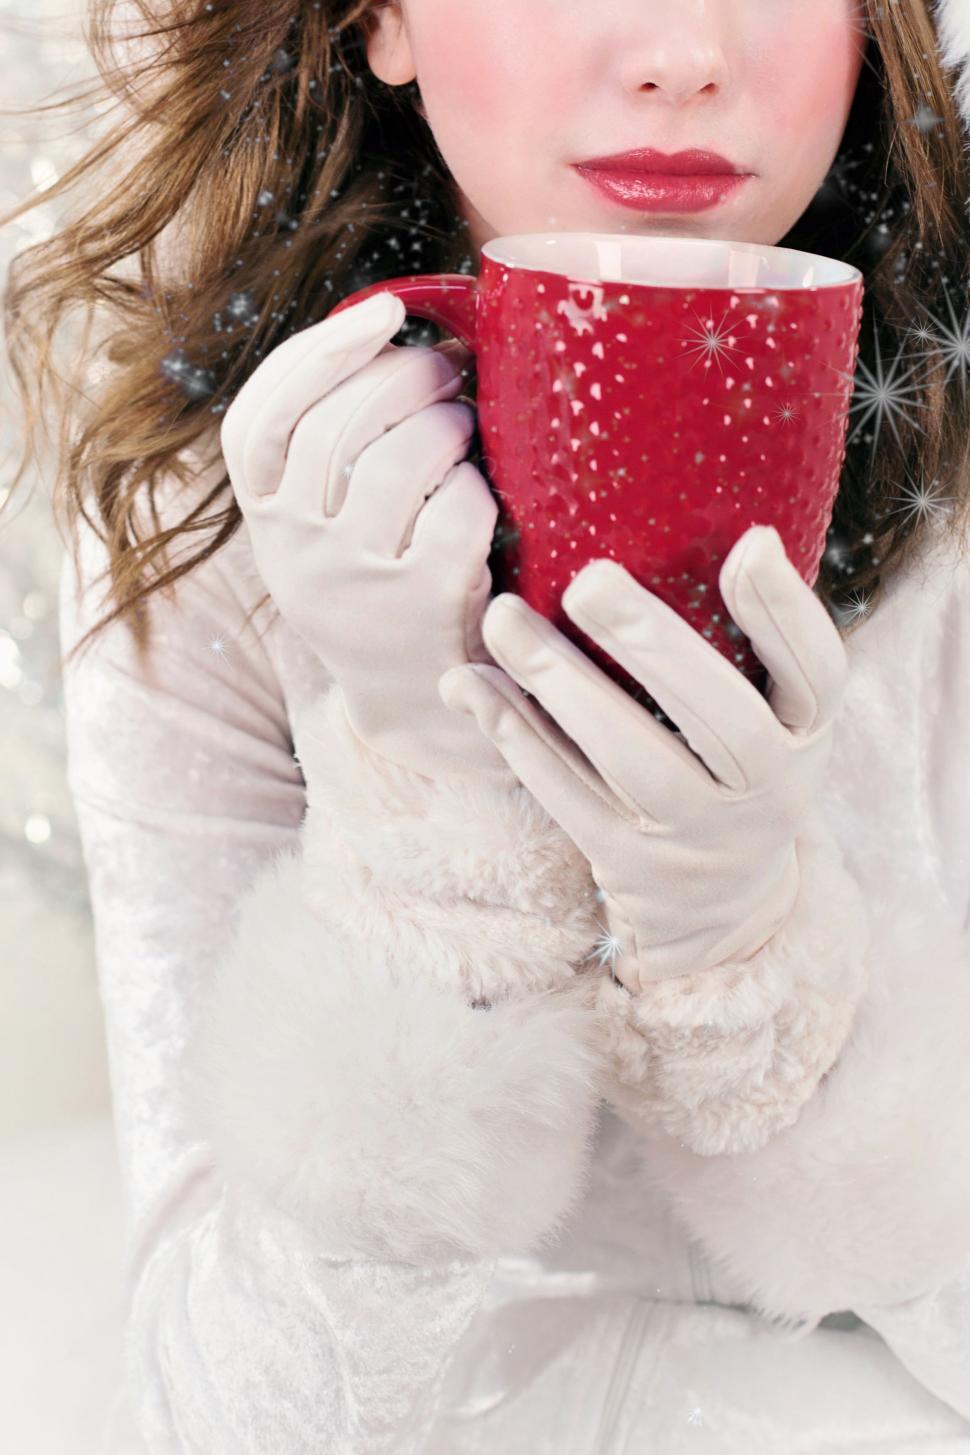 Free Image of Woman With Red Coffee Cup 